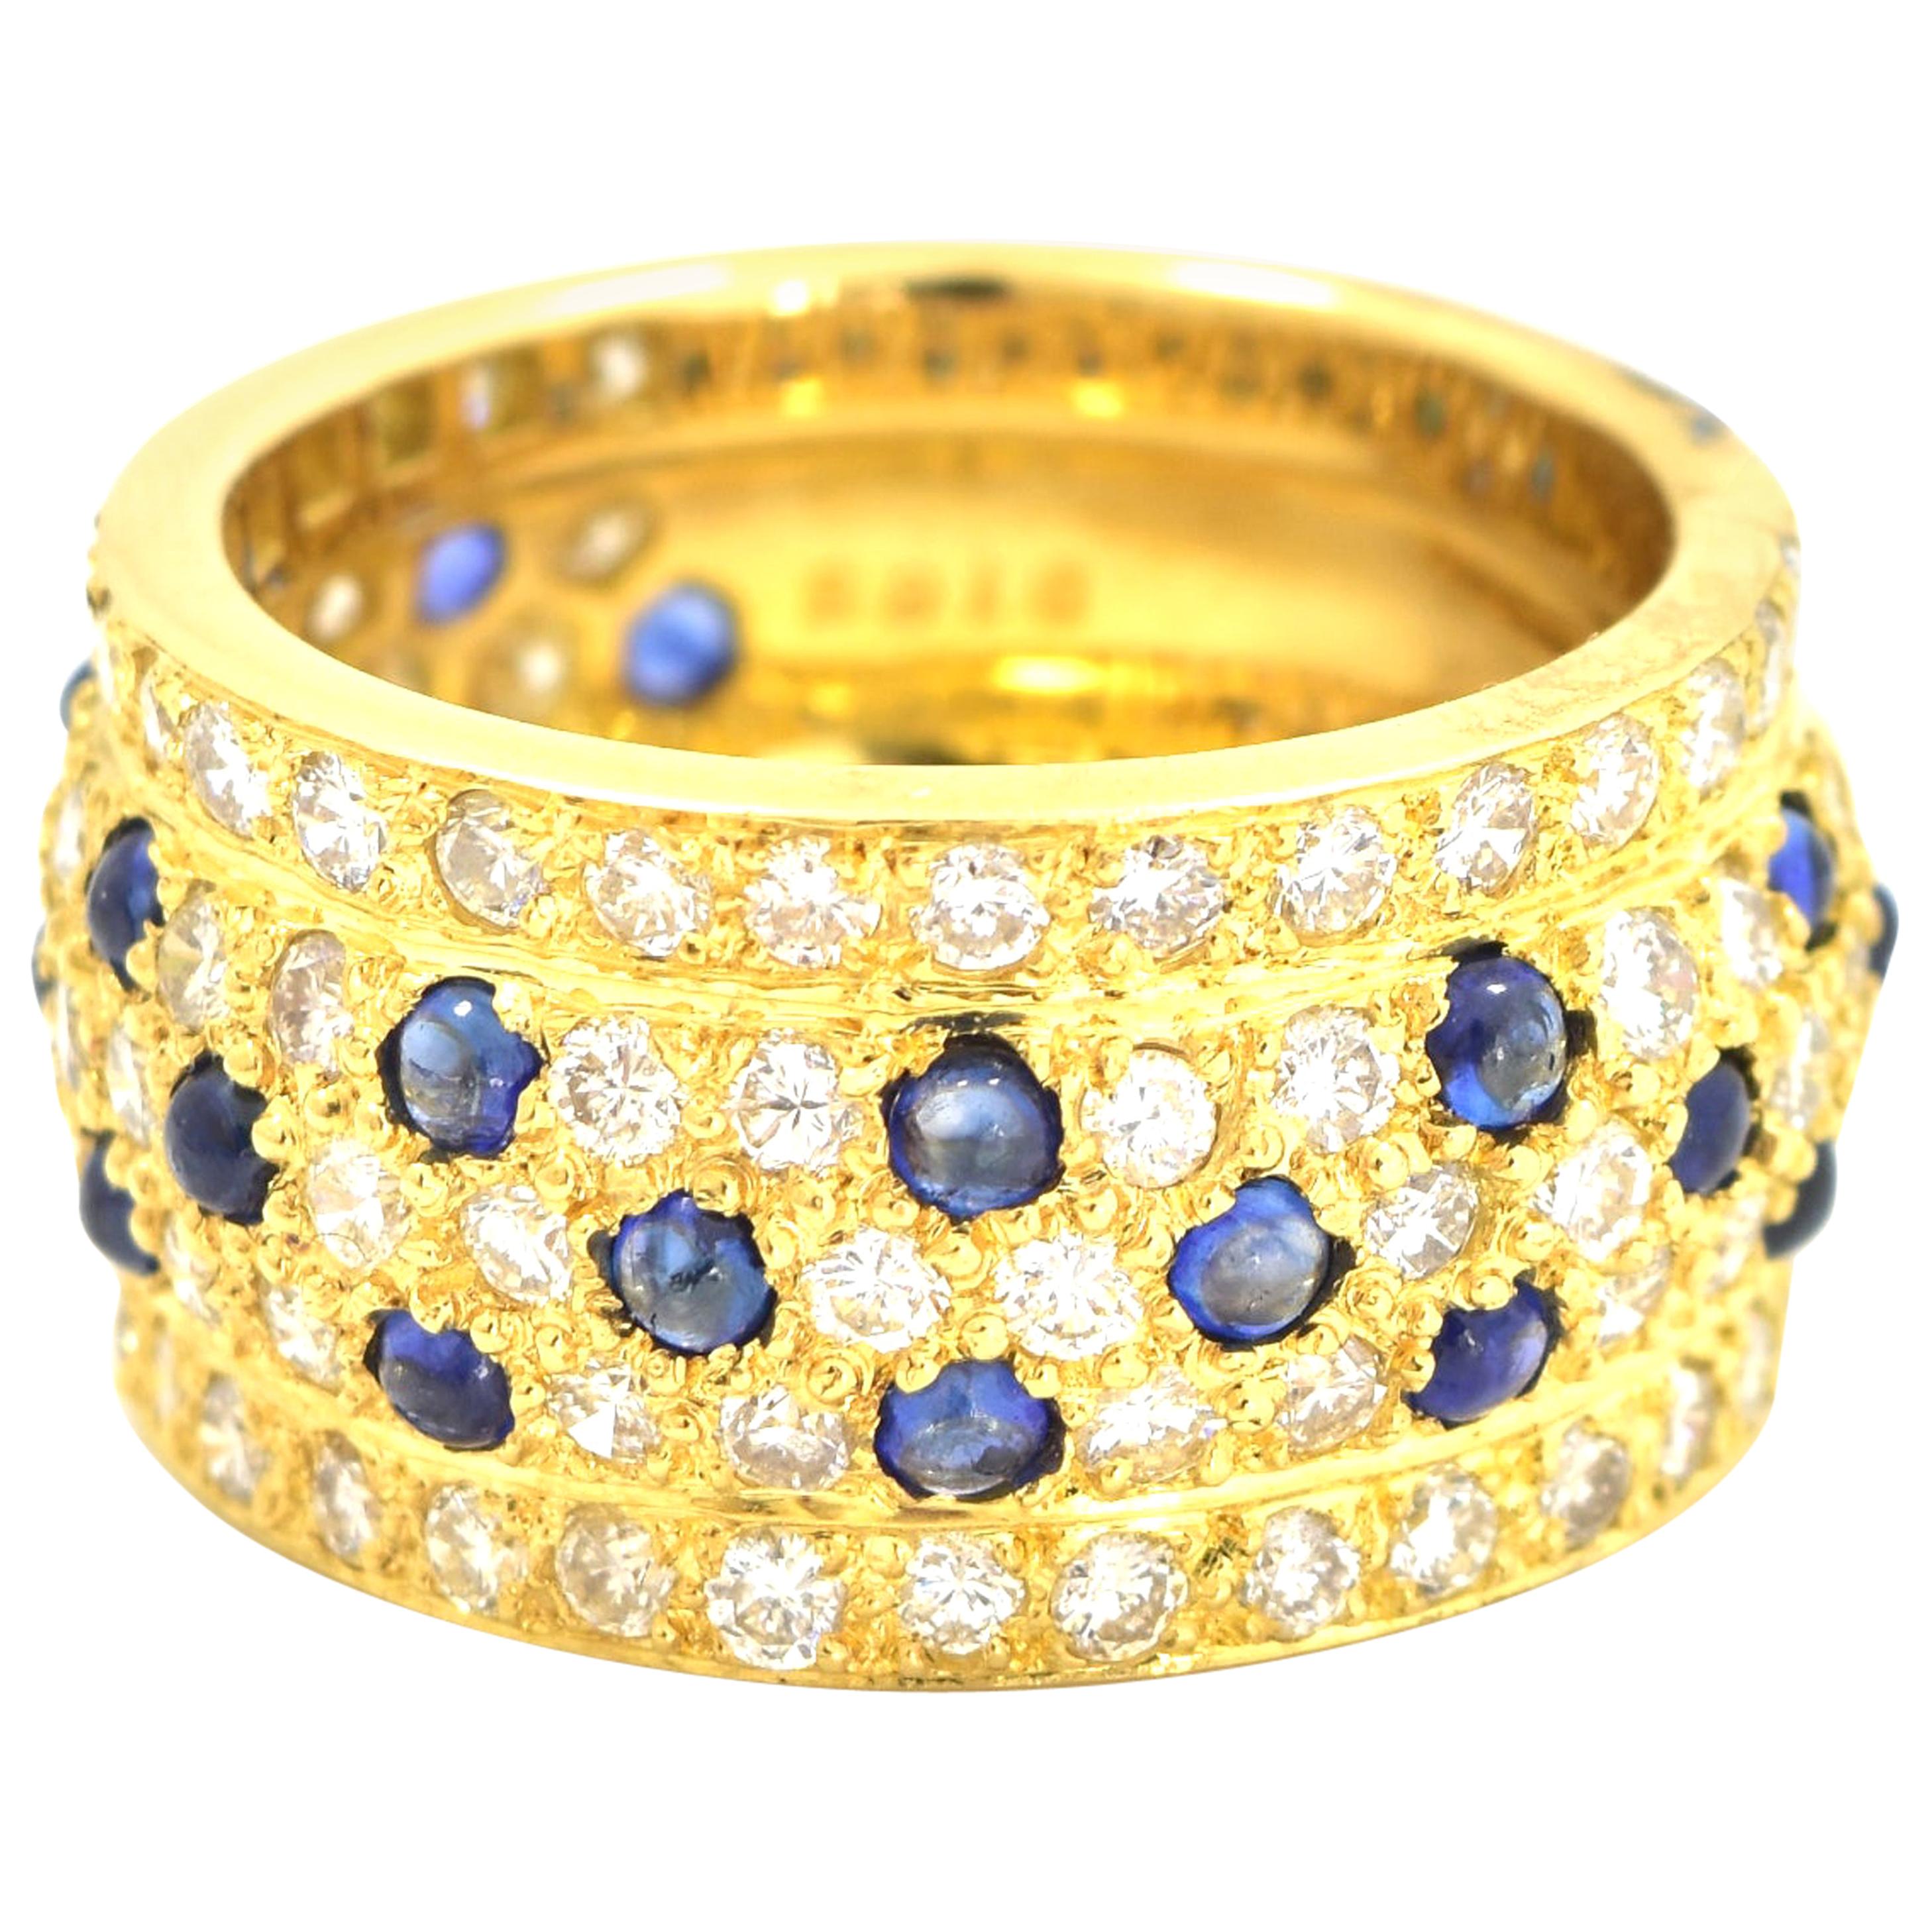 Diamond and Sapphire Wide Band in 18 Karat Yellow Gold Ring